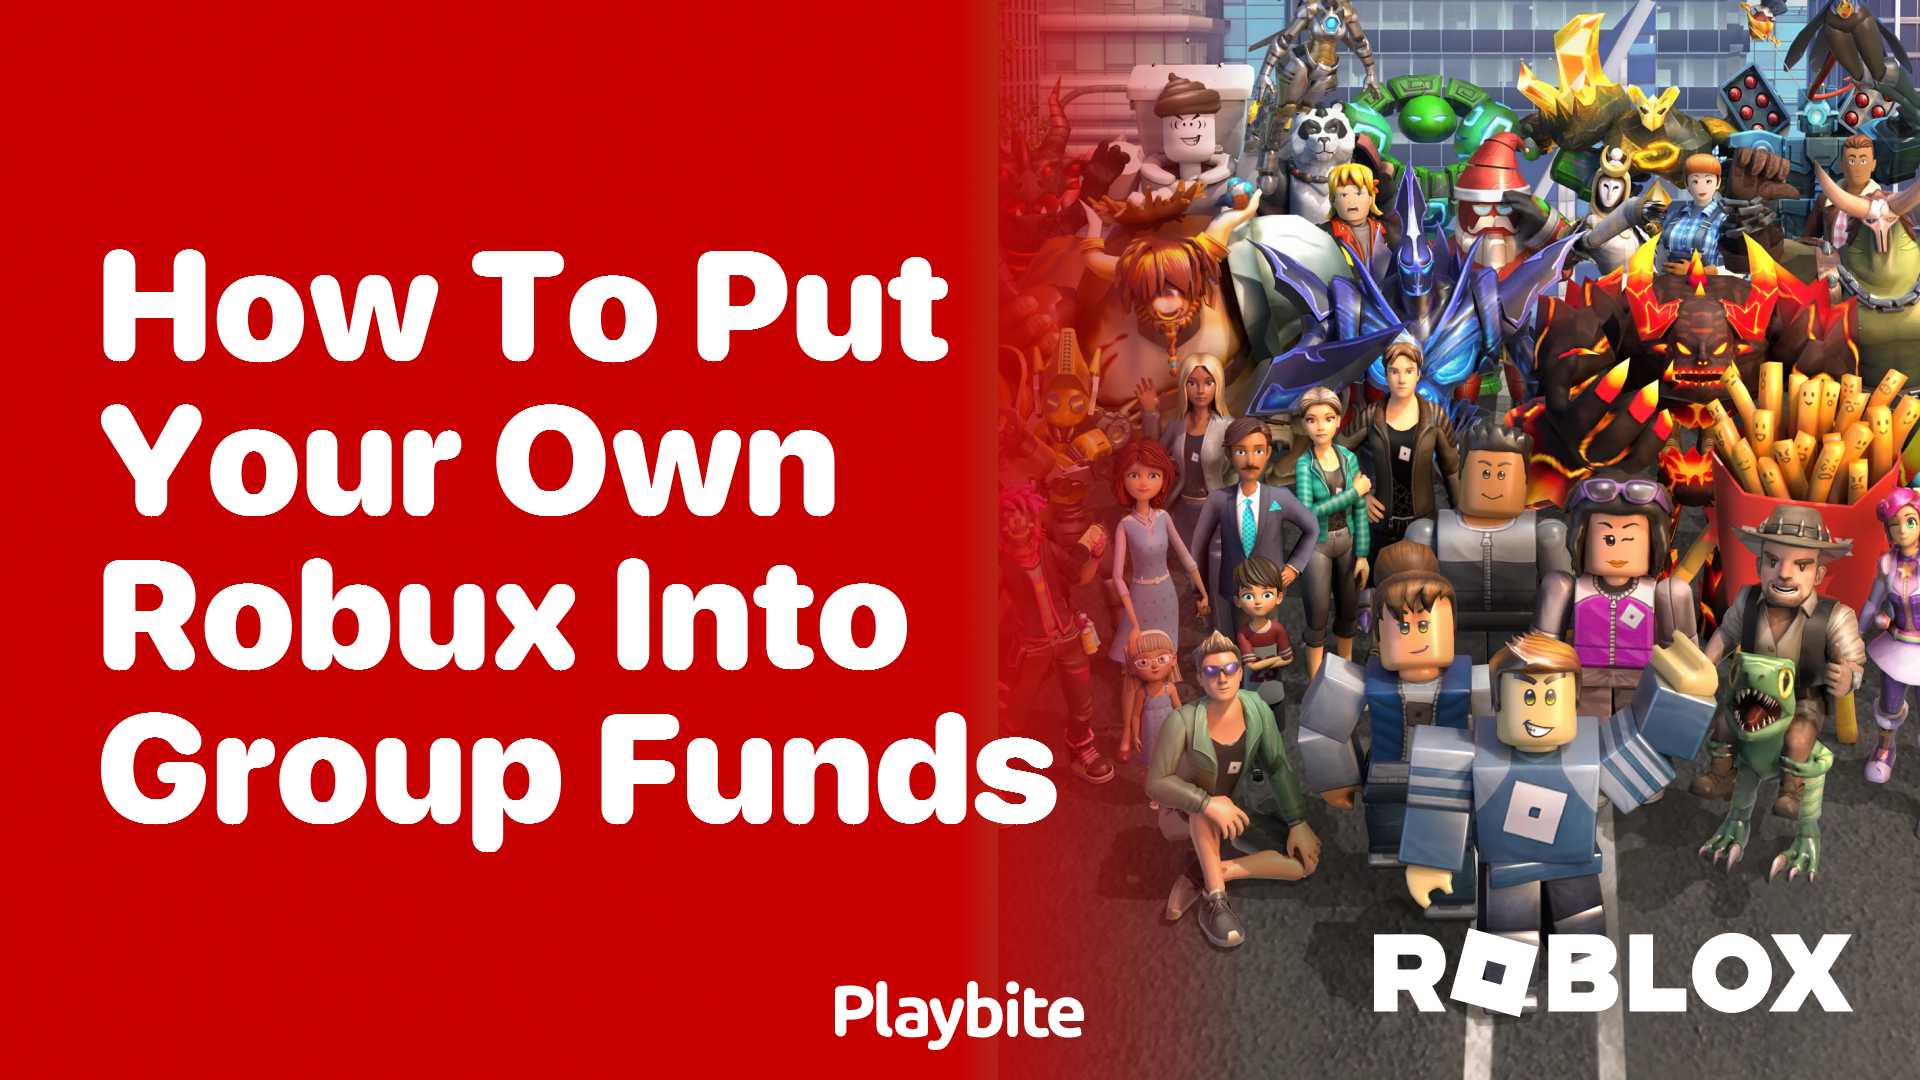 How to Put Your Own Robux into Group Funds